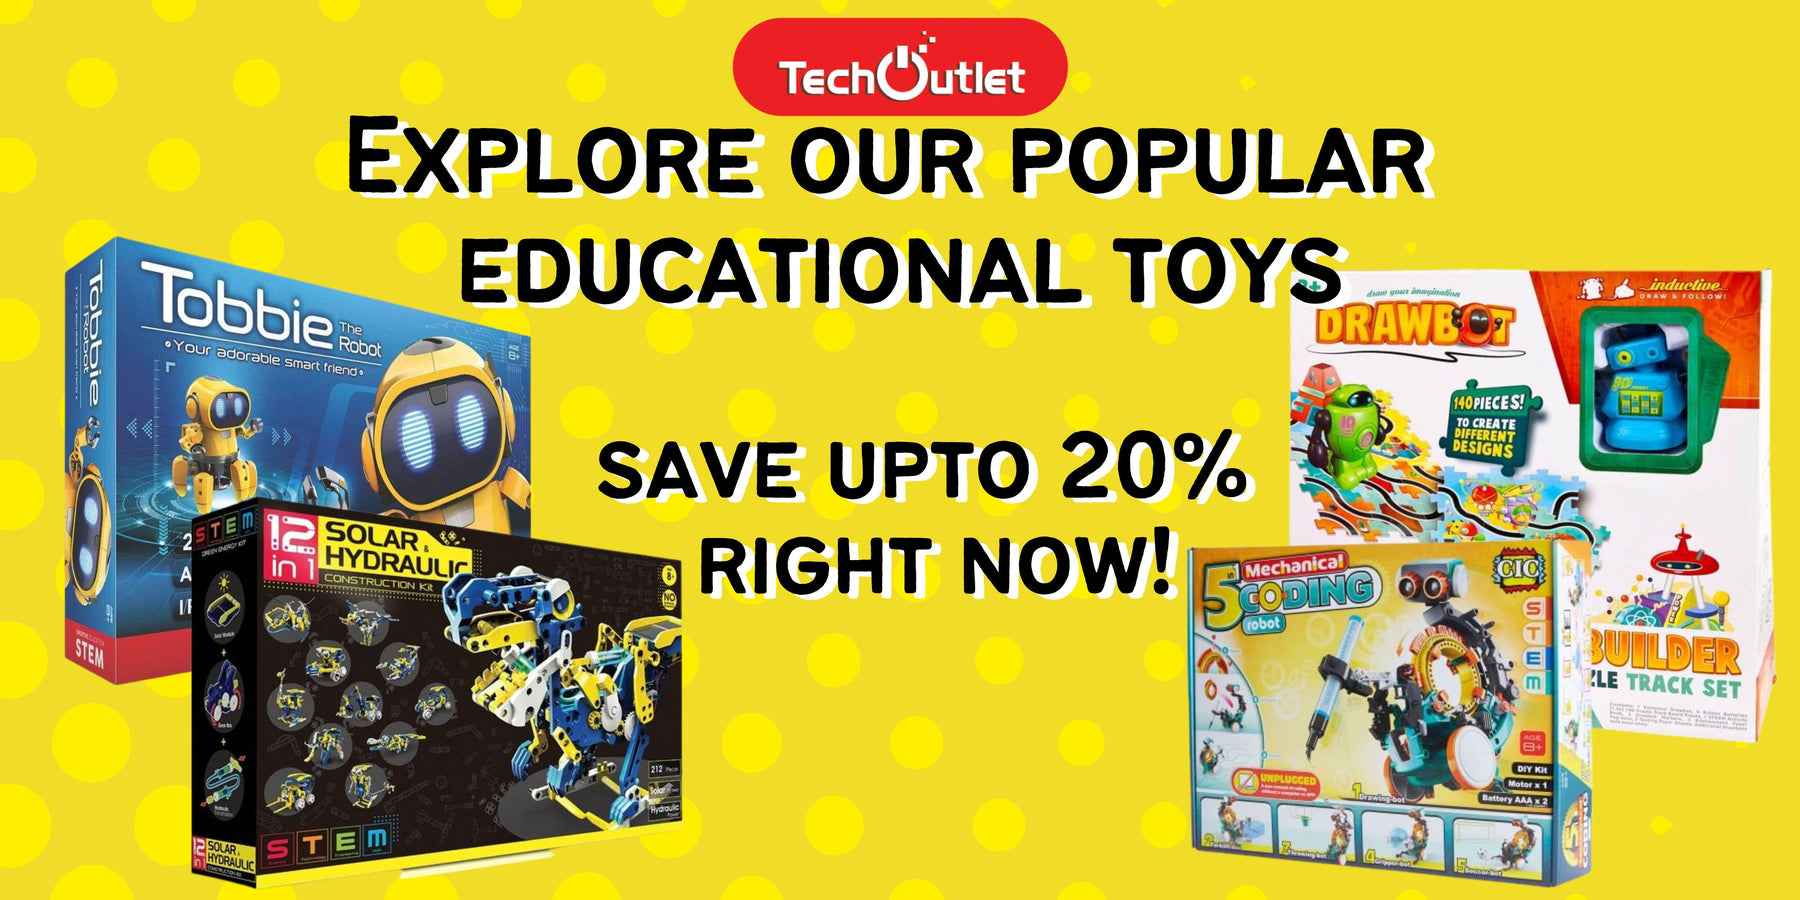 Educational toys on Sale right now!